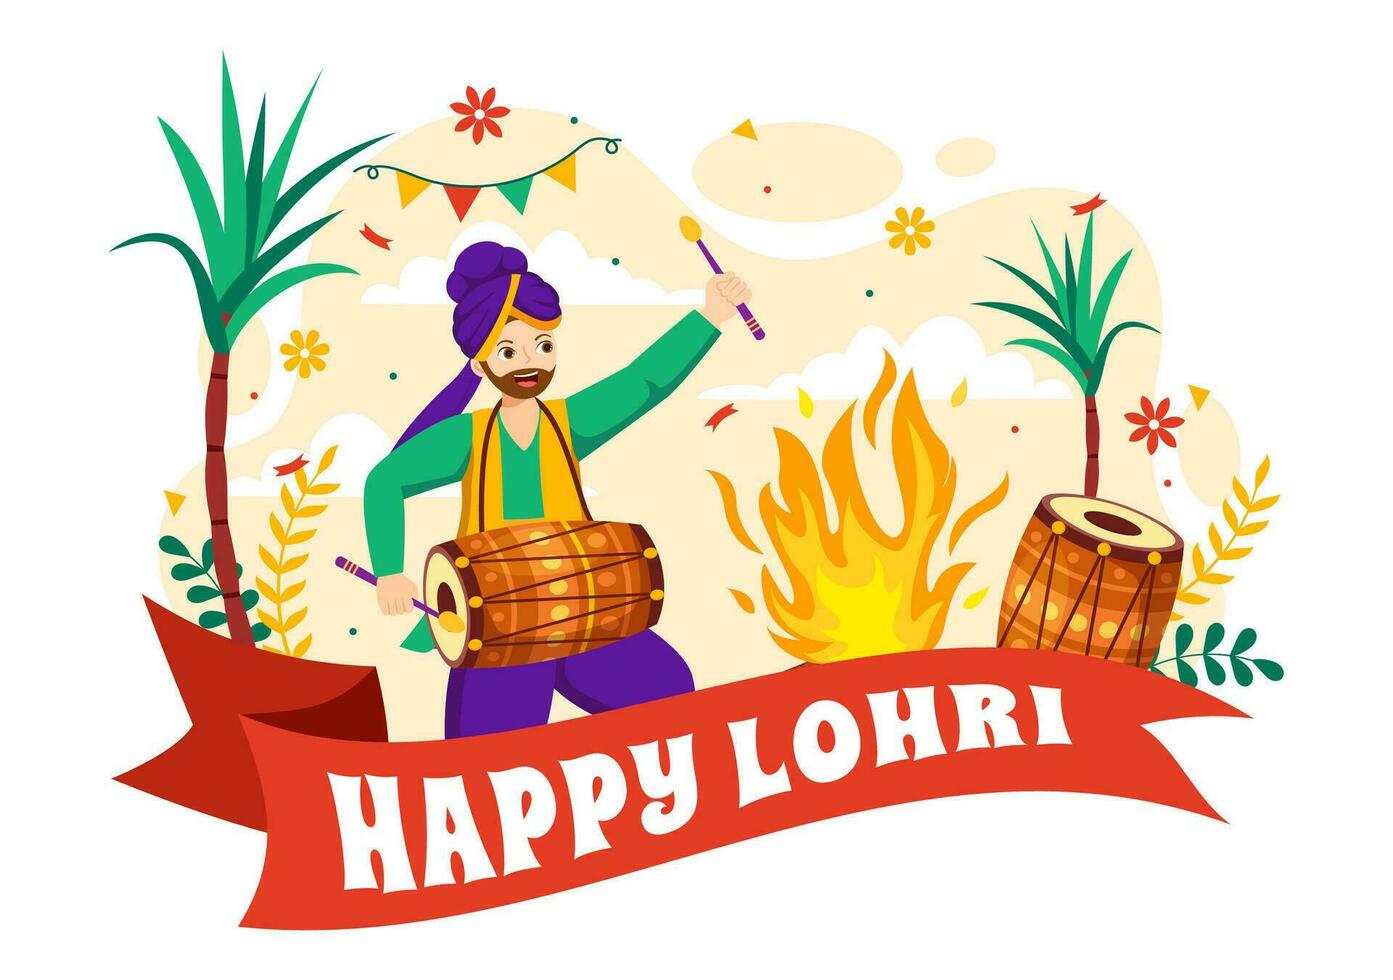 Happy Lohri Festival of Punjab India Vector Illustration of Playing Dance and Celebration Bonfire with drums and kites in Flat Cartoon Background